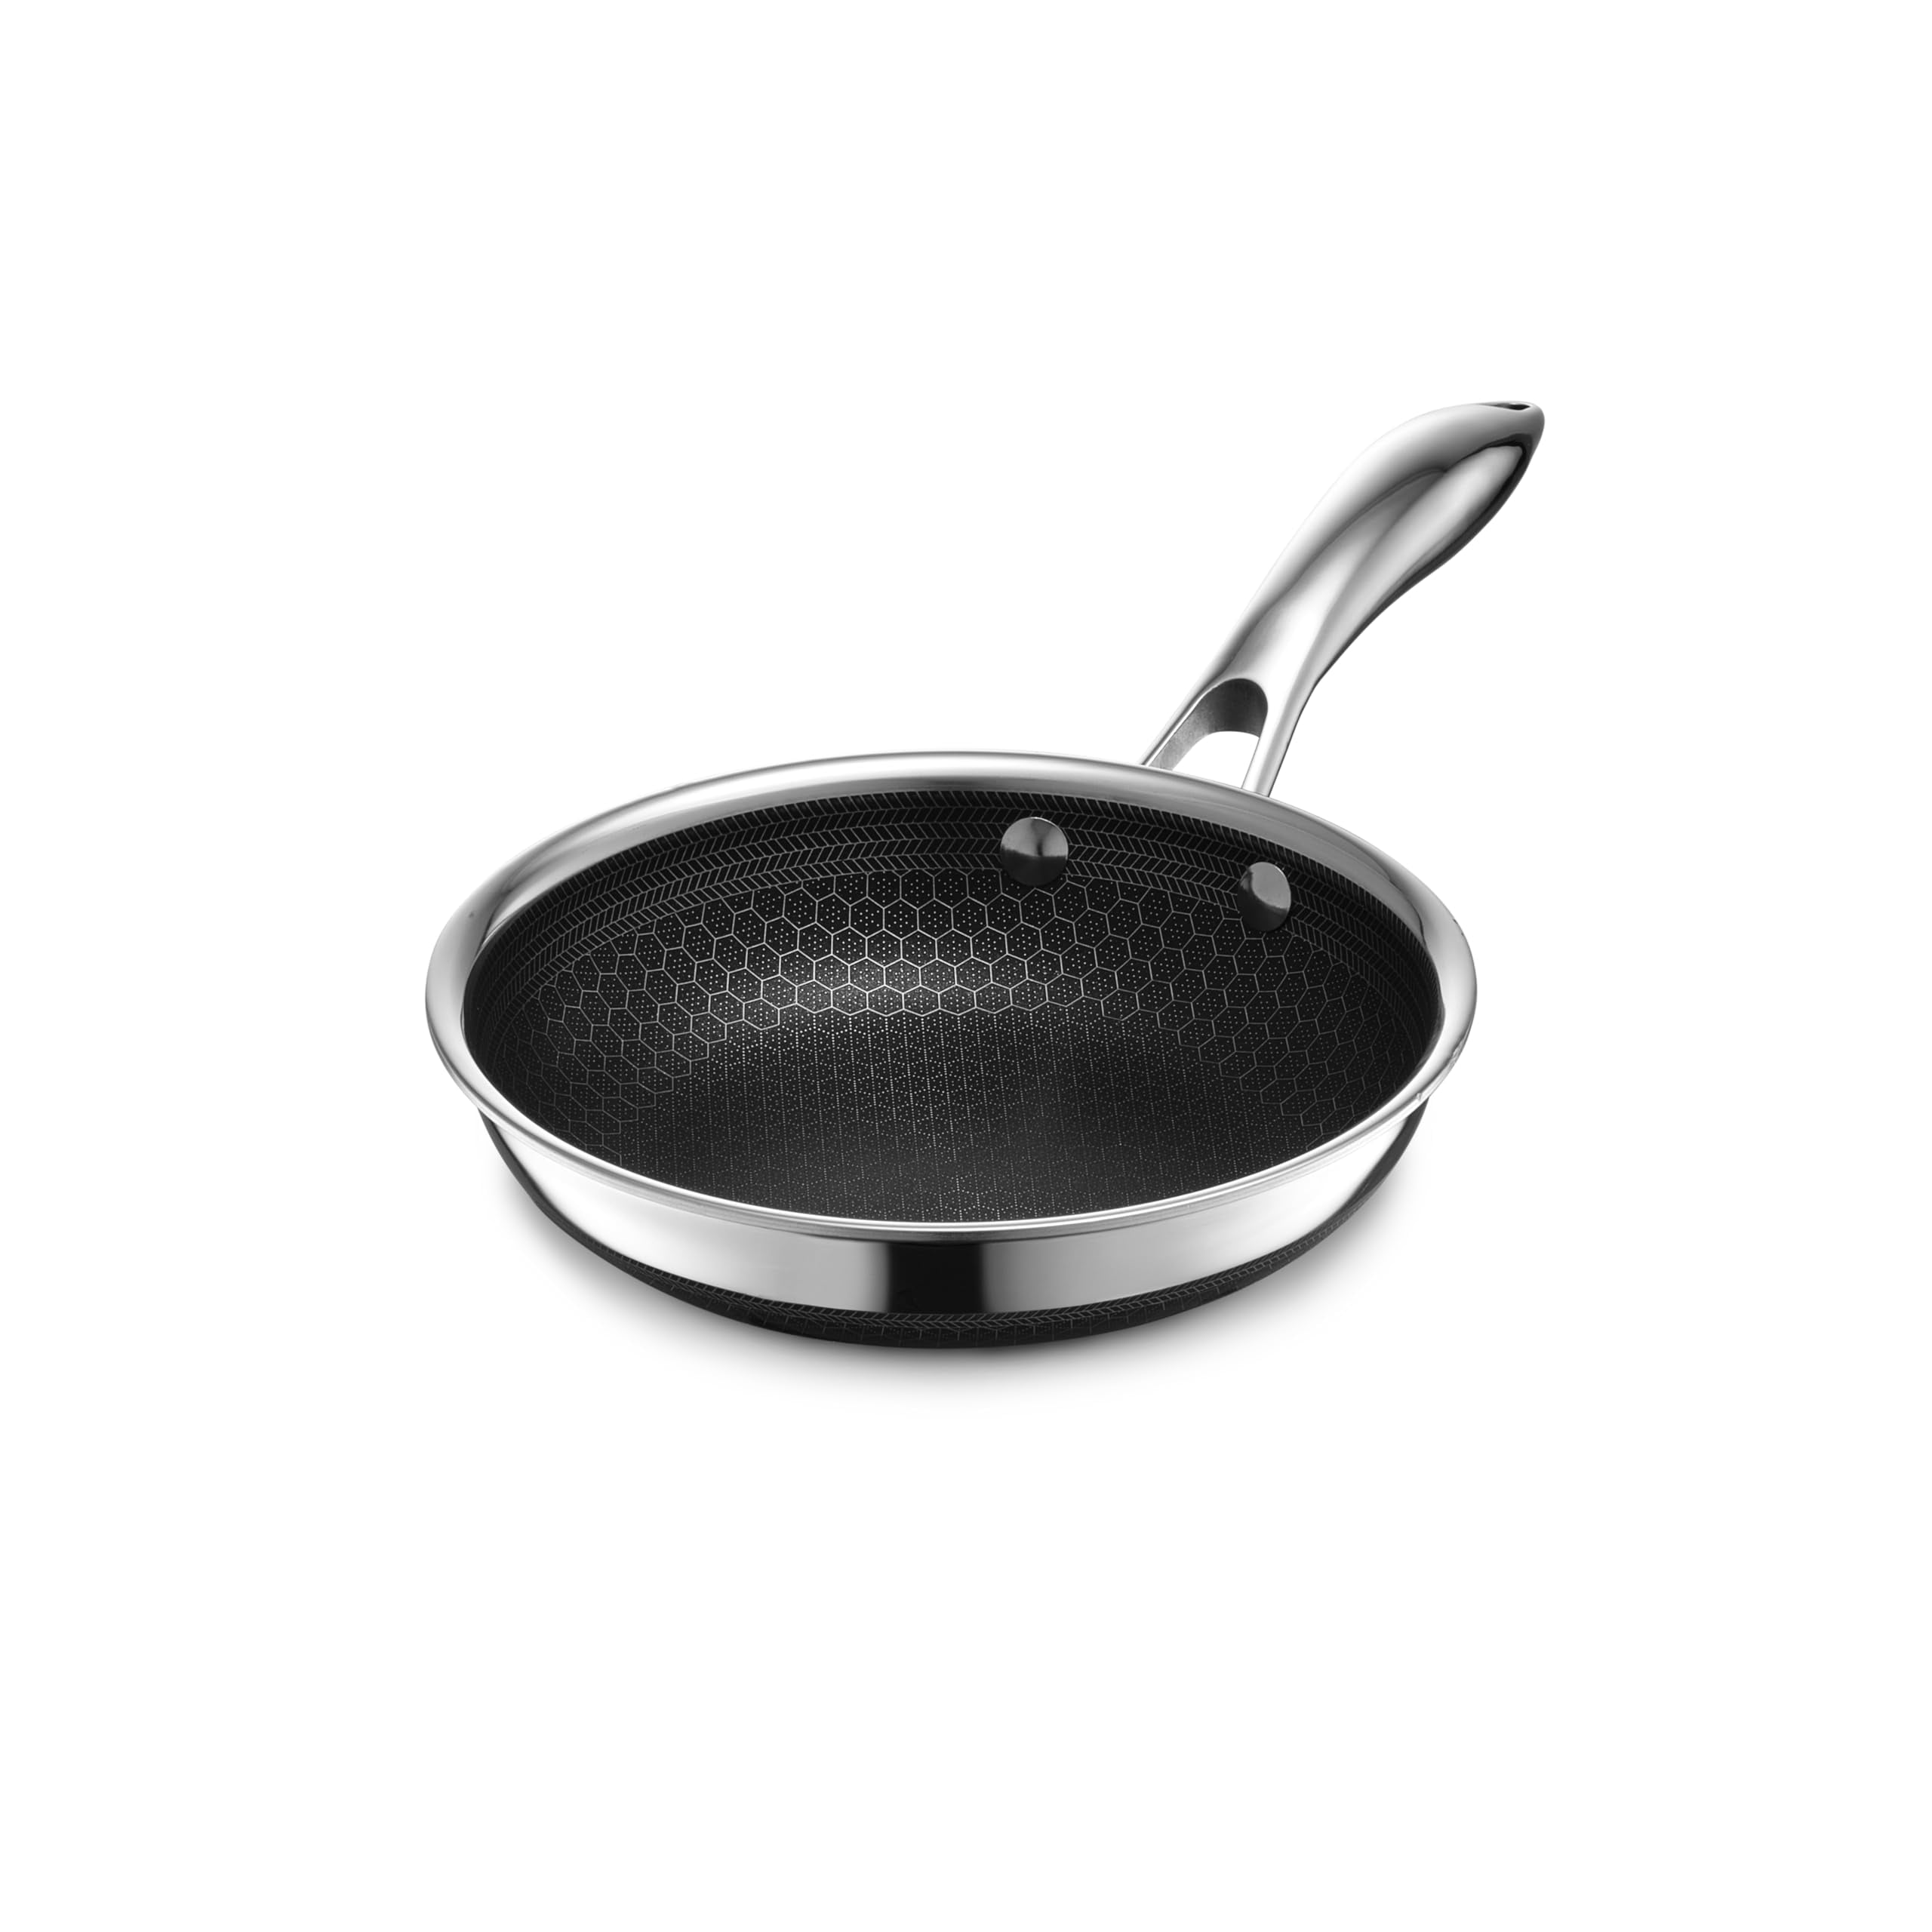 HexClad Hybrid Nonstick Sauté Pan and Lid, Chicken Fryer, 7-Quart,  Dishwasher and Oven-Safe, Compatible with All Cooktops